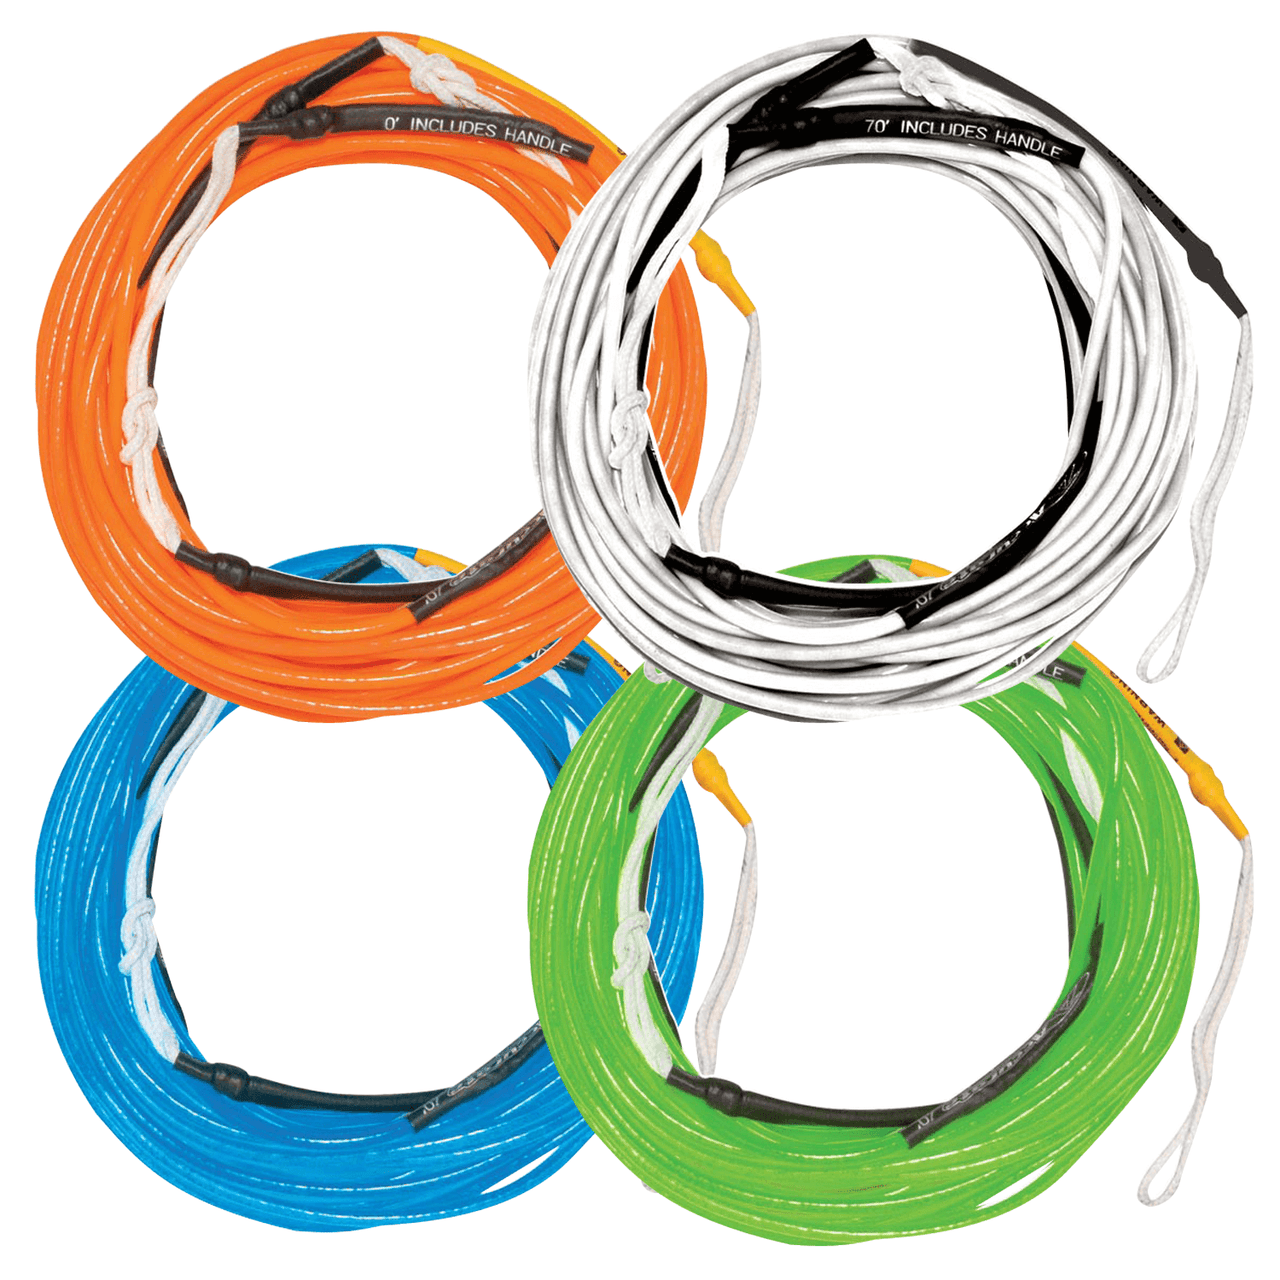 Hyperlite 70 Ft Silicone X-Line Rope